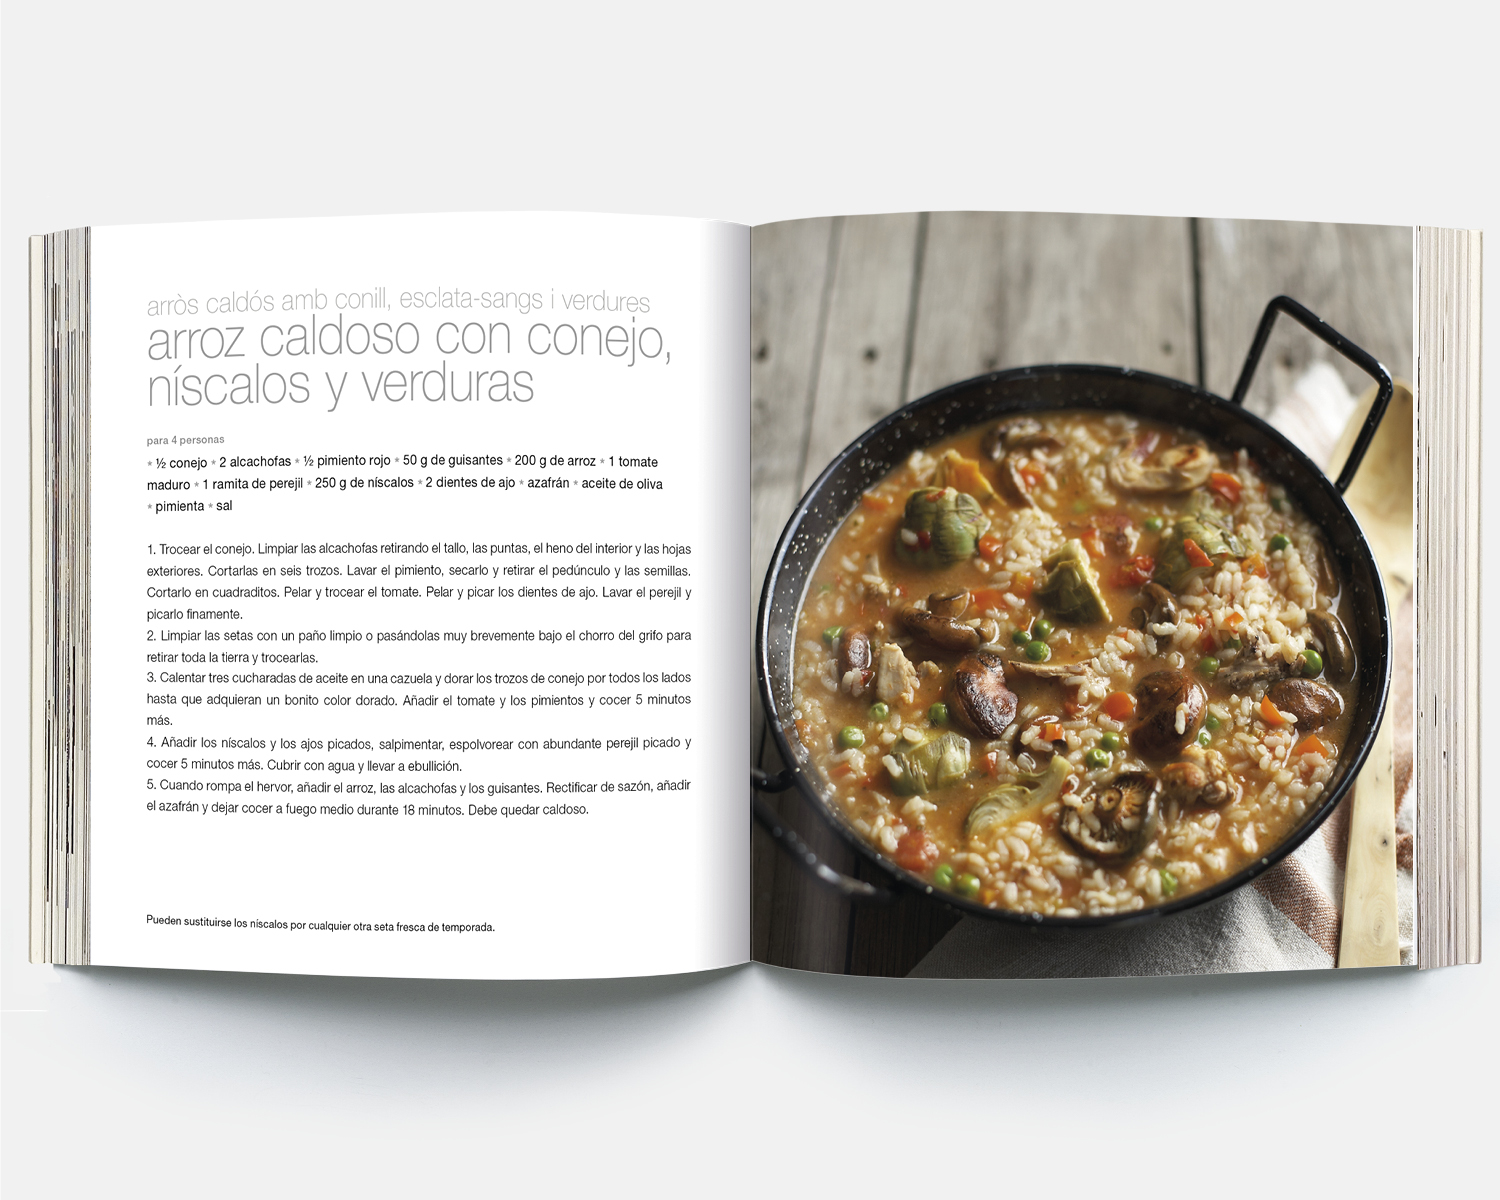 Valencian gastronomy and cuisine CUV 6